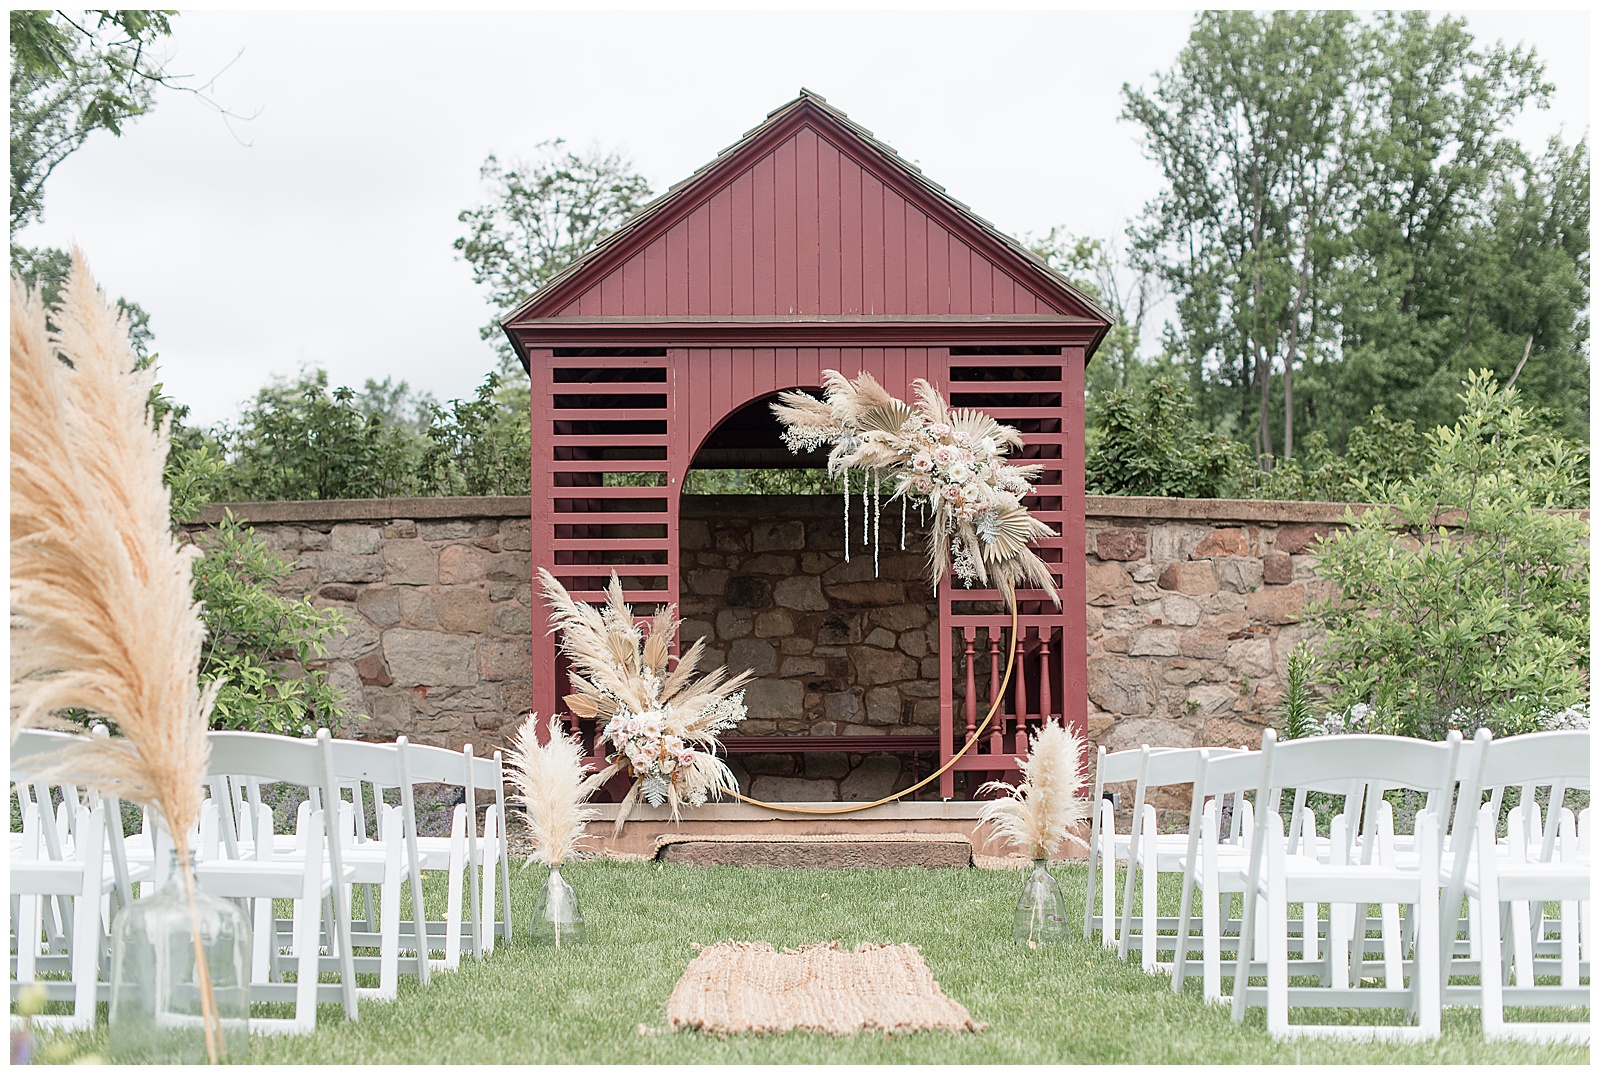 small maroon barn structure with floral archway at outdoor wedding ceremony area with rows of white chairs in lititz pennsylvania